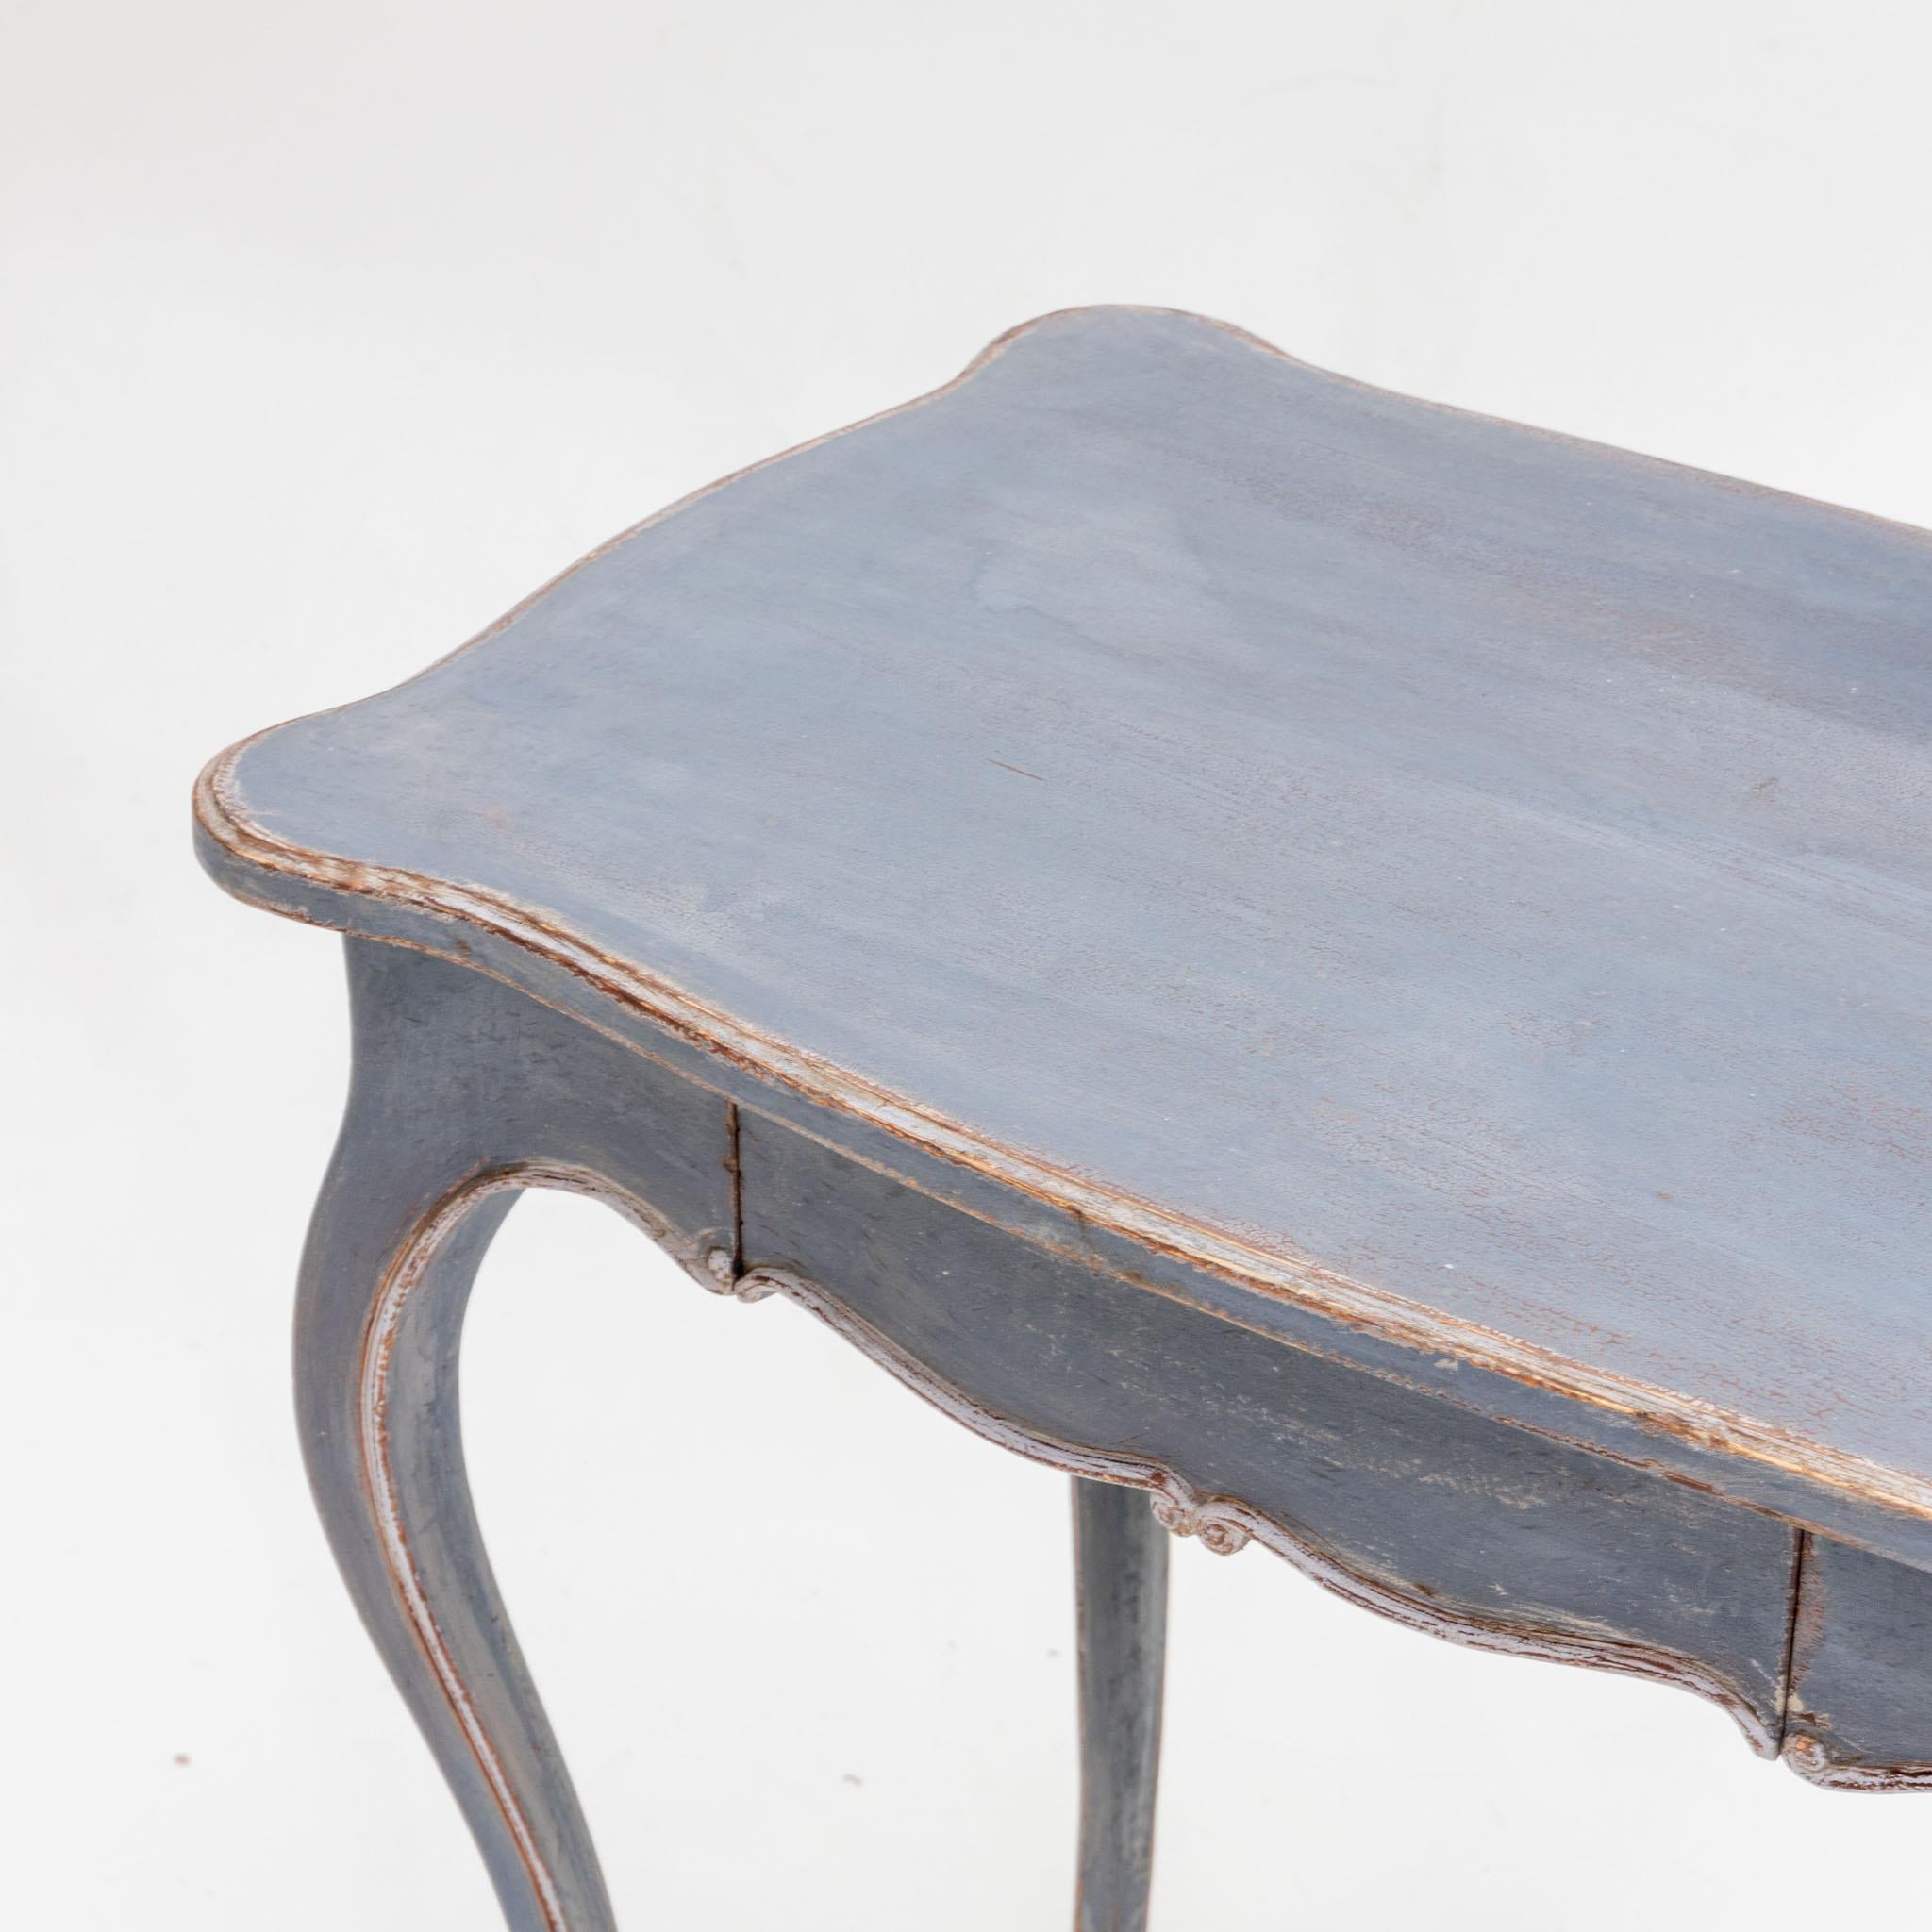 Small side table in softwood with one drawer and high elegant S-legs. The frame is multi-curved like the tabletop. The light blue setting is new and has a decorative patina.